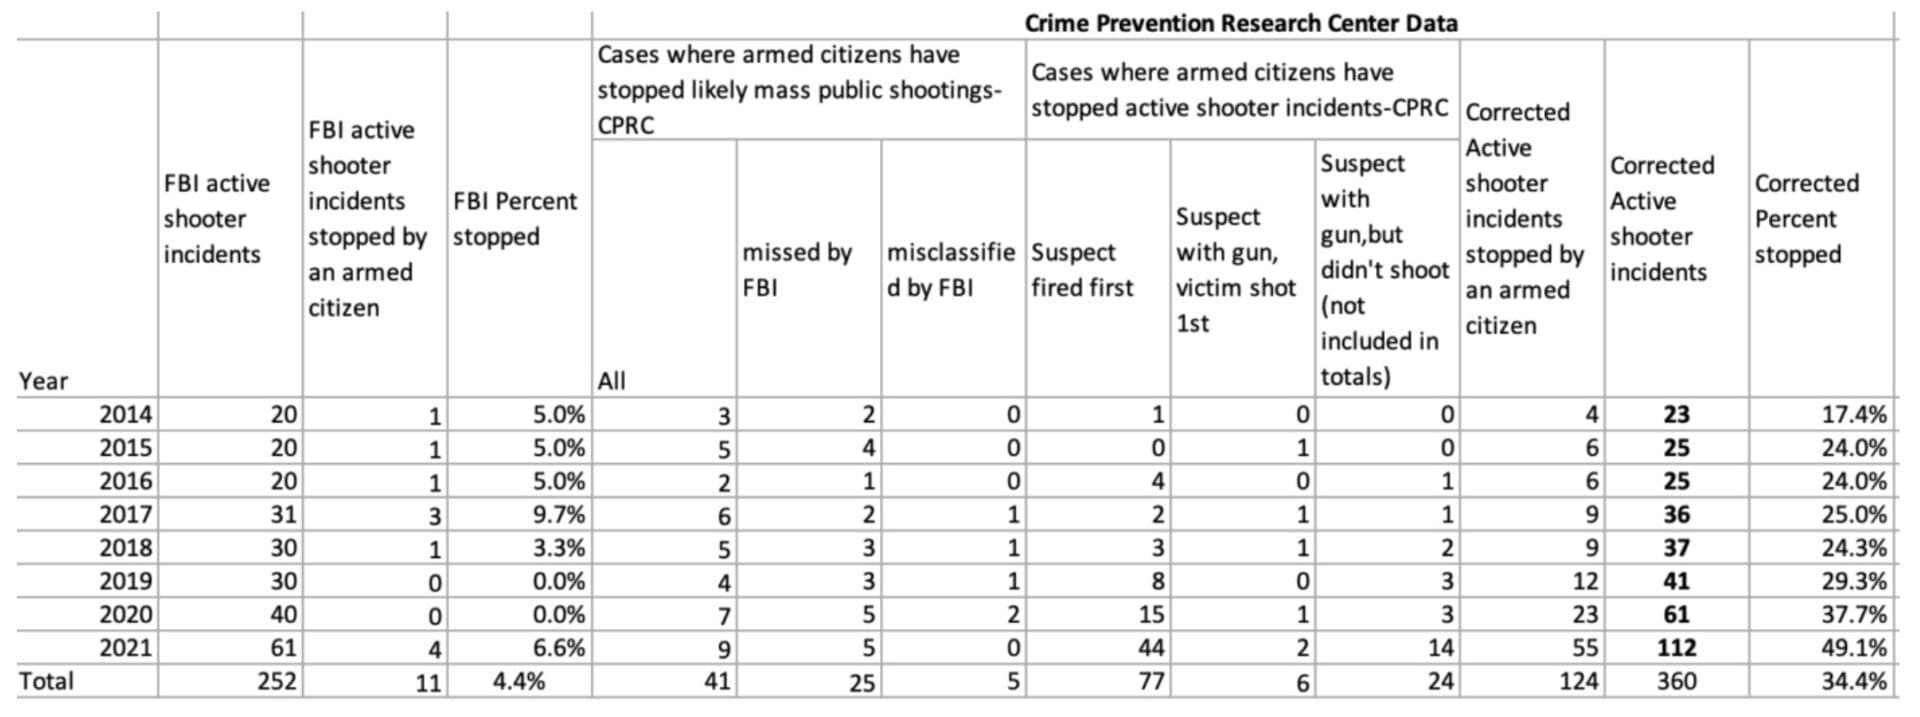 Crime Prevention Research Center CPRC active shooter data